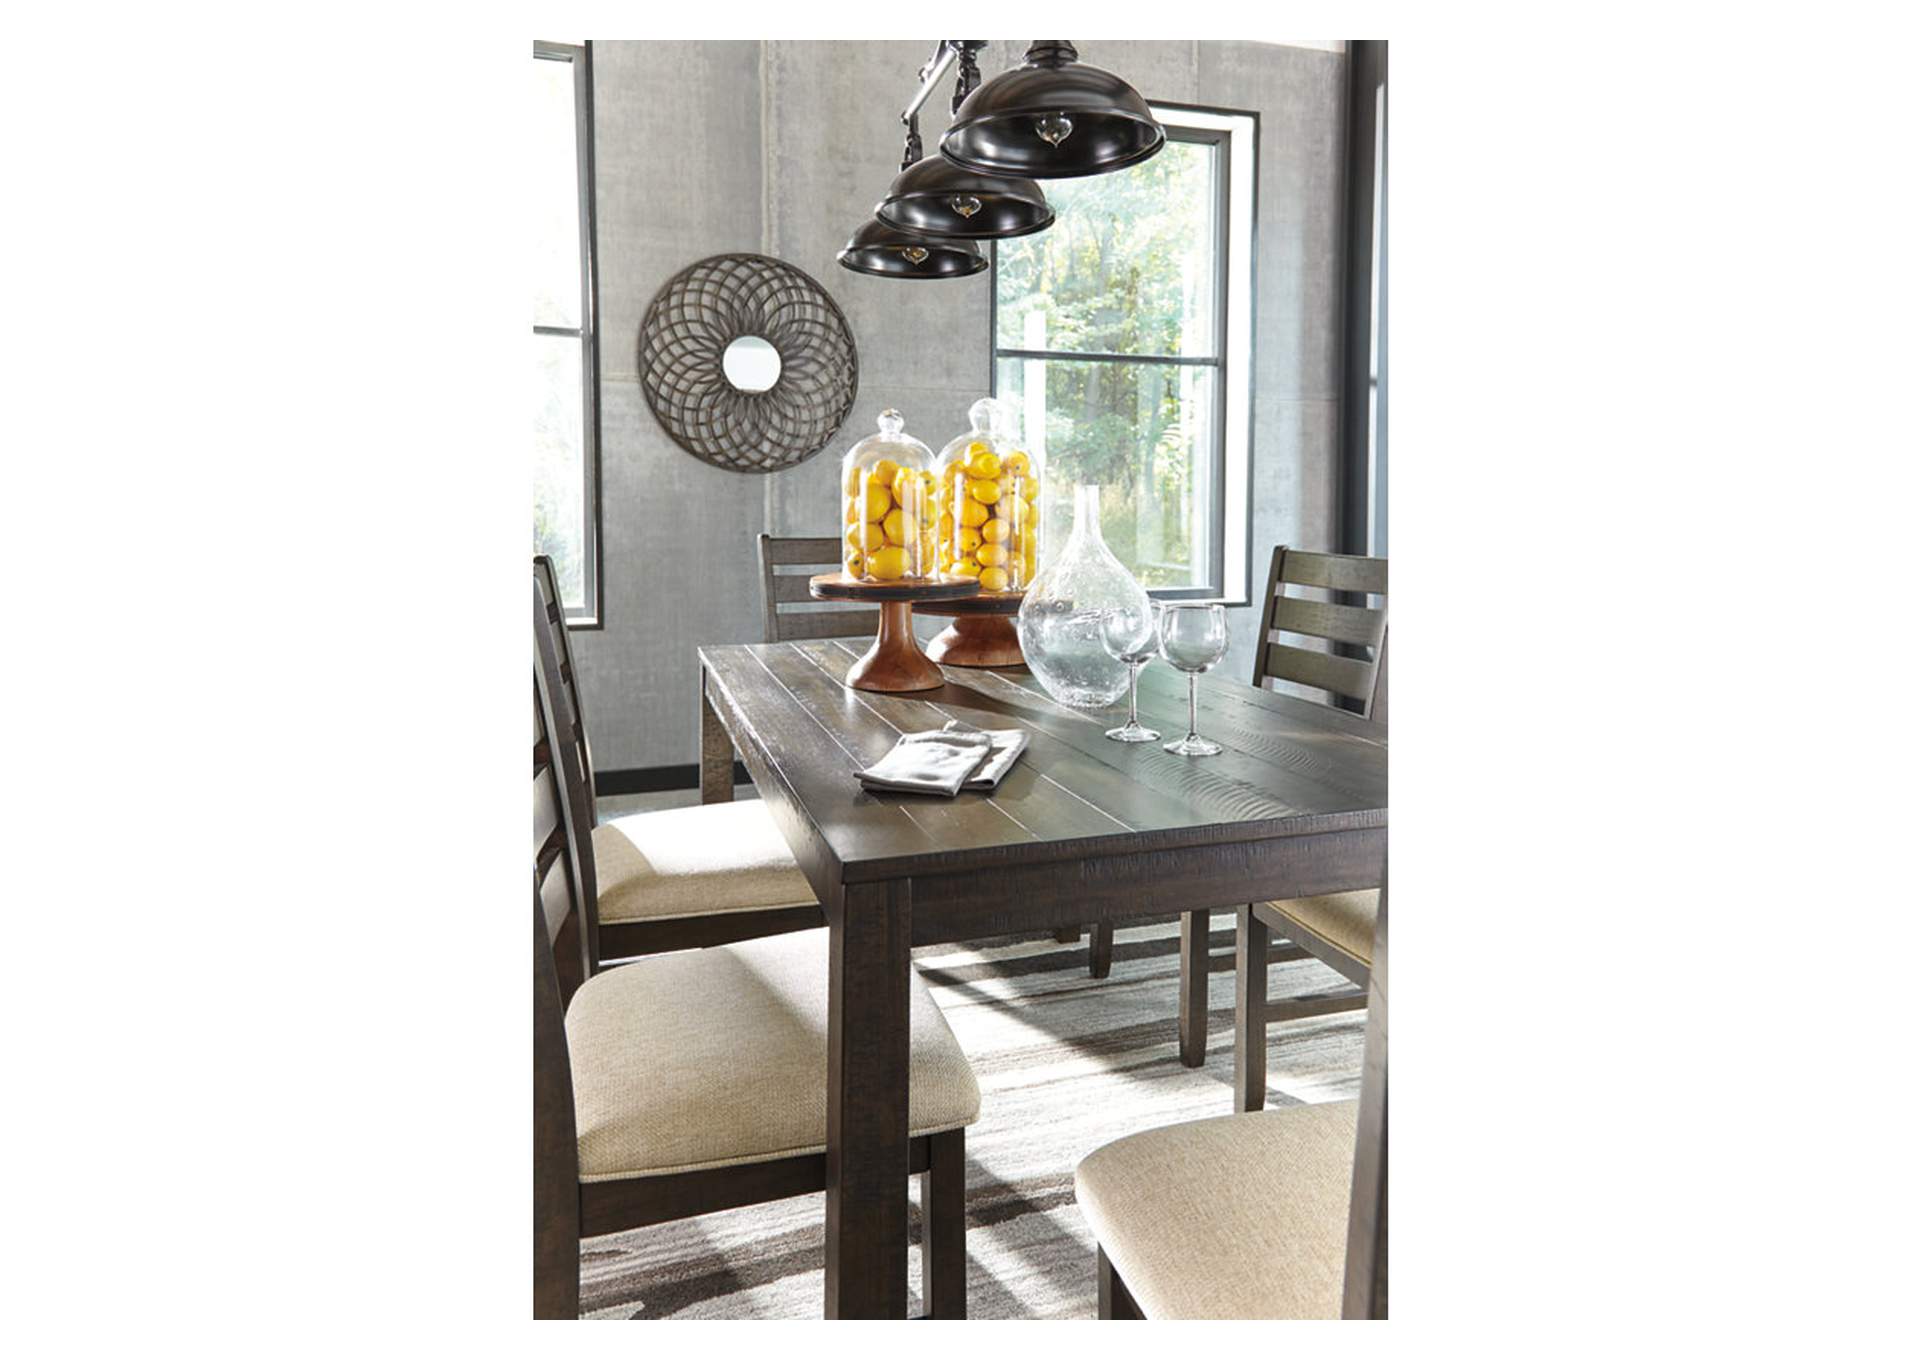 Rokane Dining Table and Chairs (Set of 7),Signature Design By Ashley